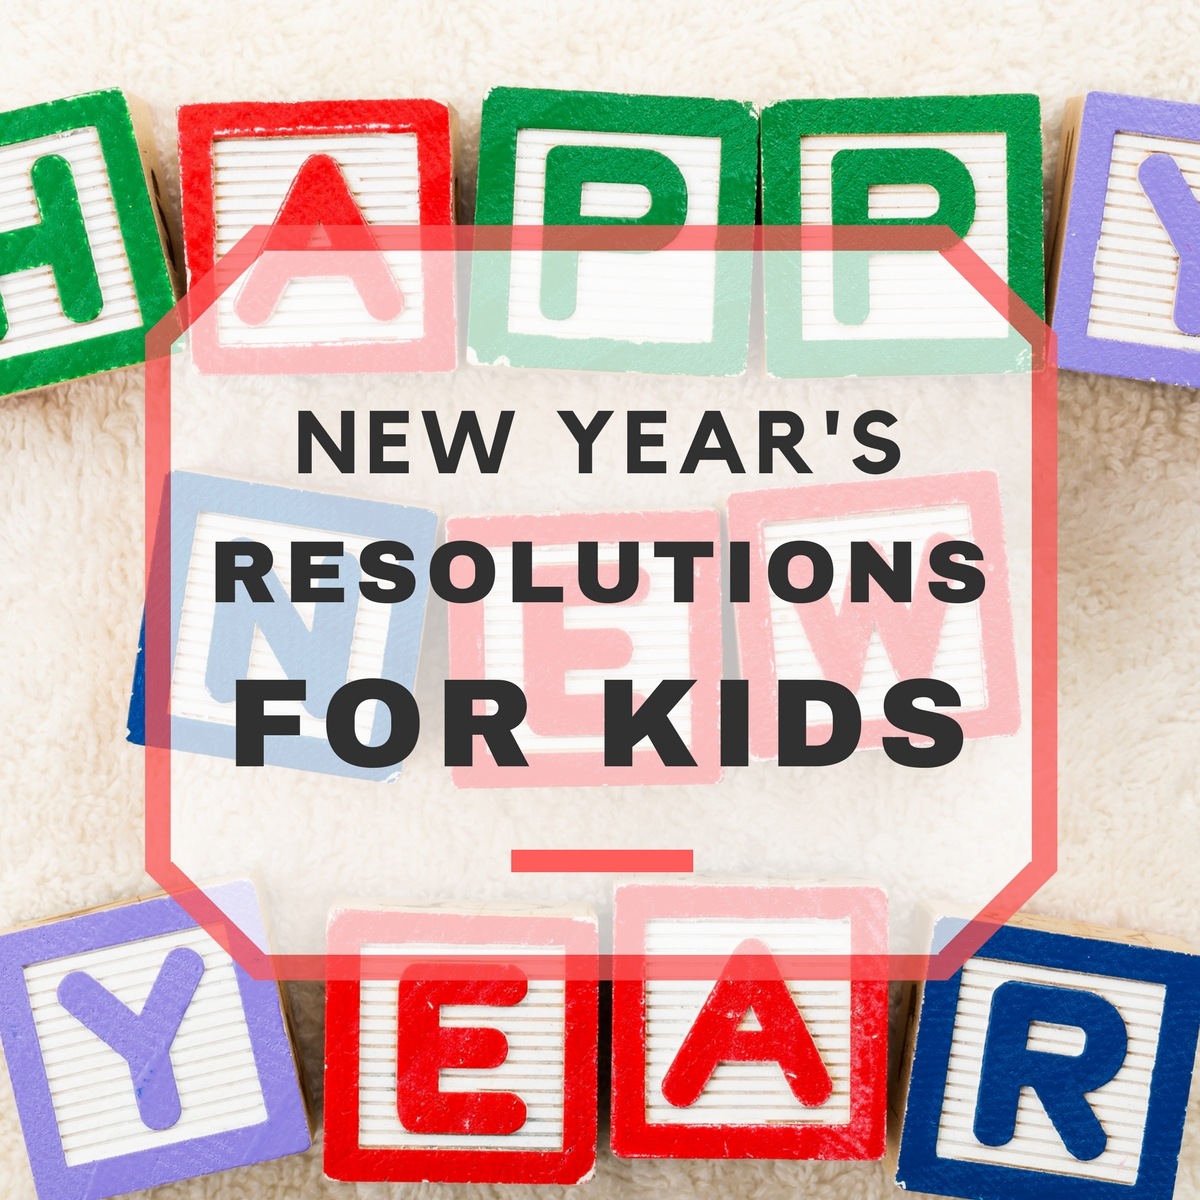 35 New Year’s Resolution Ideas for Kids